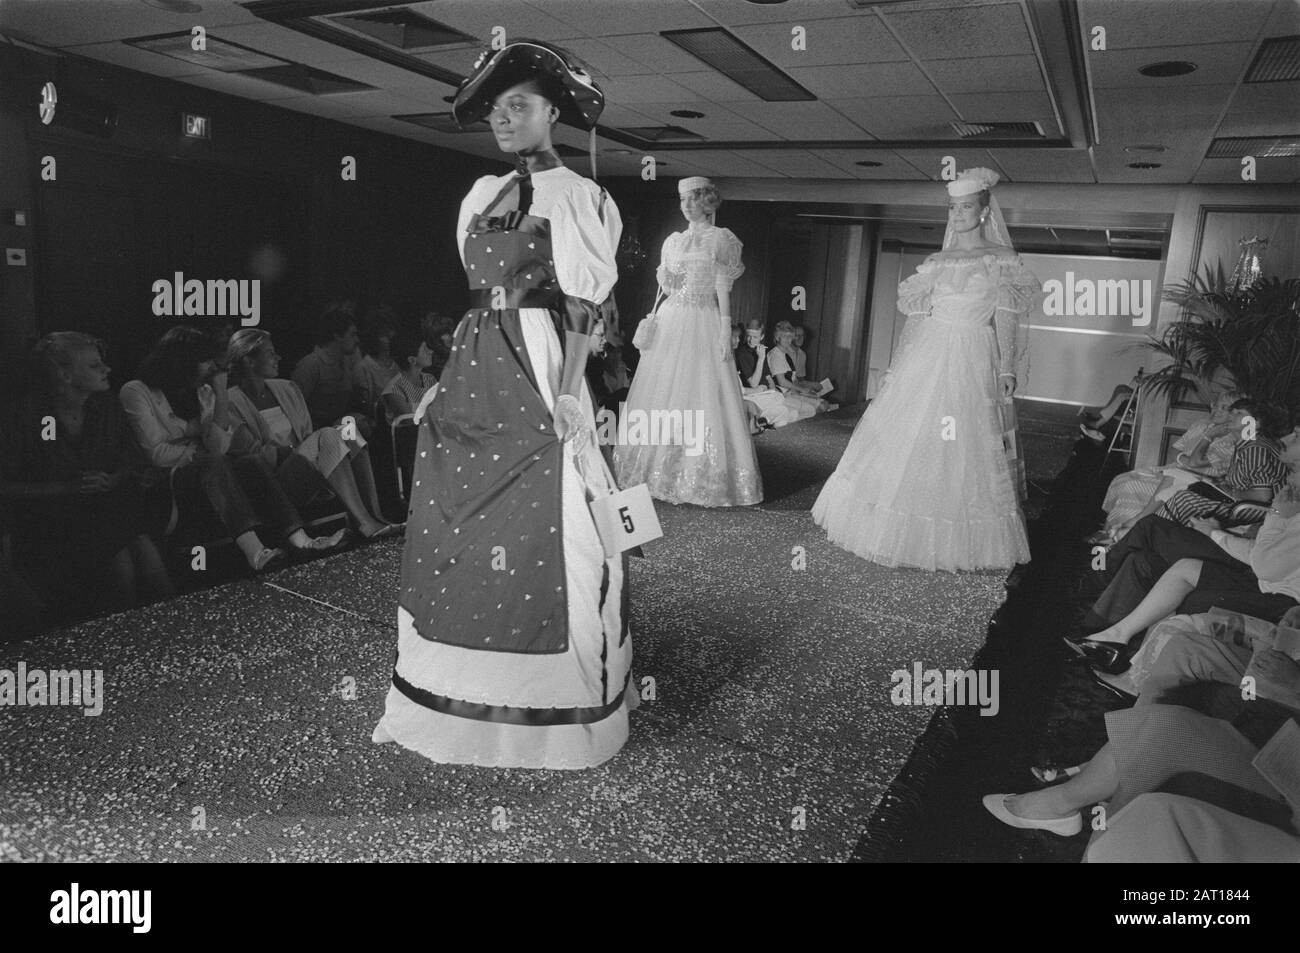 First National Wedding Fair at Marriot Hotel in Amsterdam bridal Clothing during fashion show Data: 11 agosto 1984 luogo: Amsterdam, Noord-Holland Parole Chiave: Fiere Foto Stock